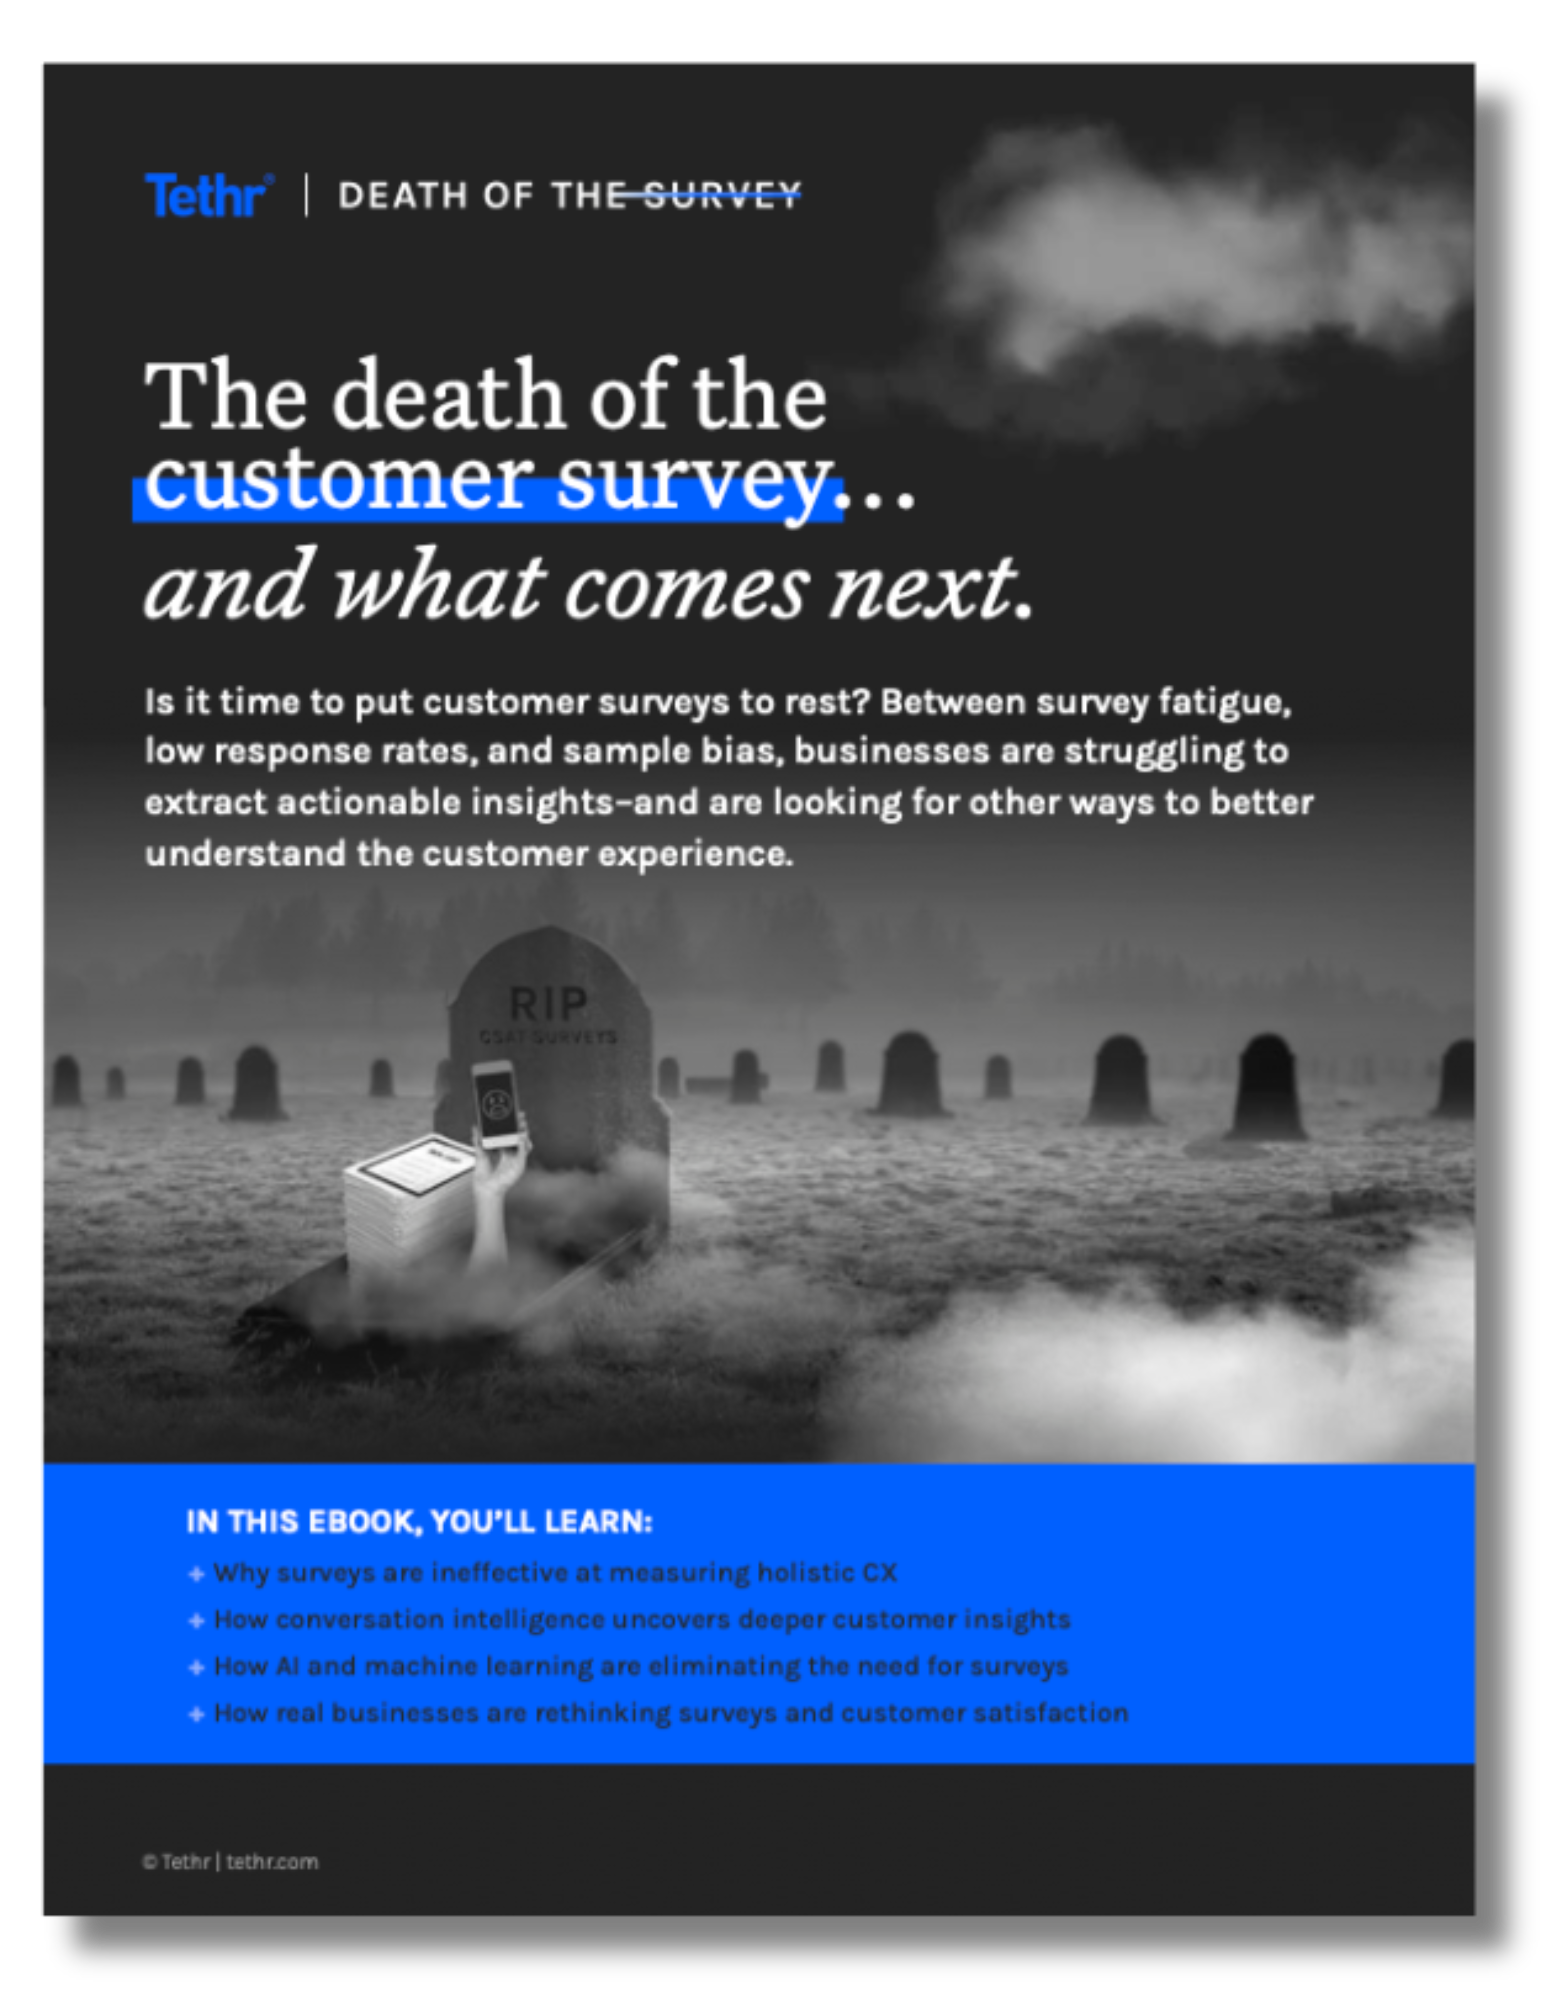 Death of the survey cover dark